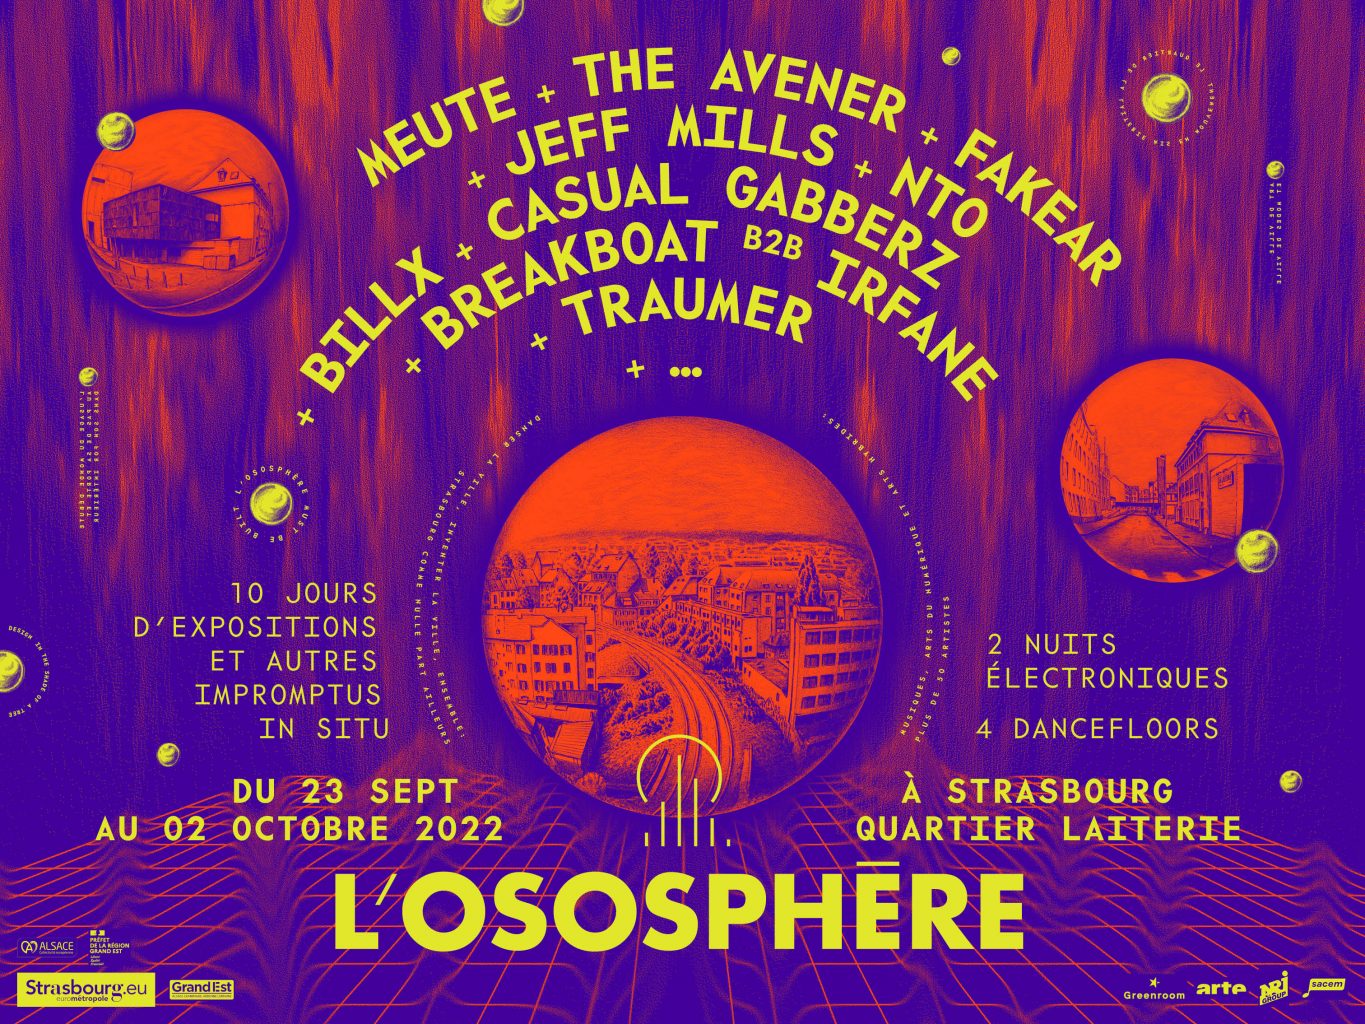 Illustrations, posters, L’Ososphère Festival, Septembre 2022, designed by In the shade of a tree studio.